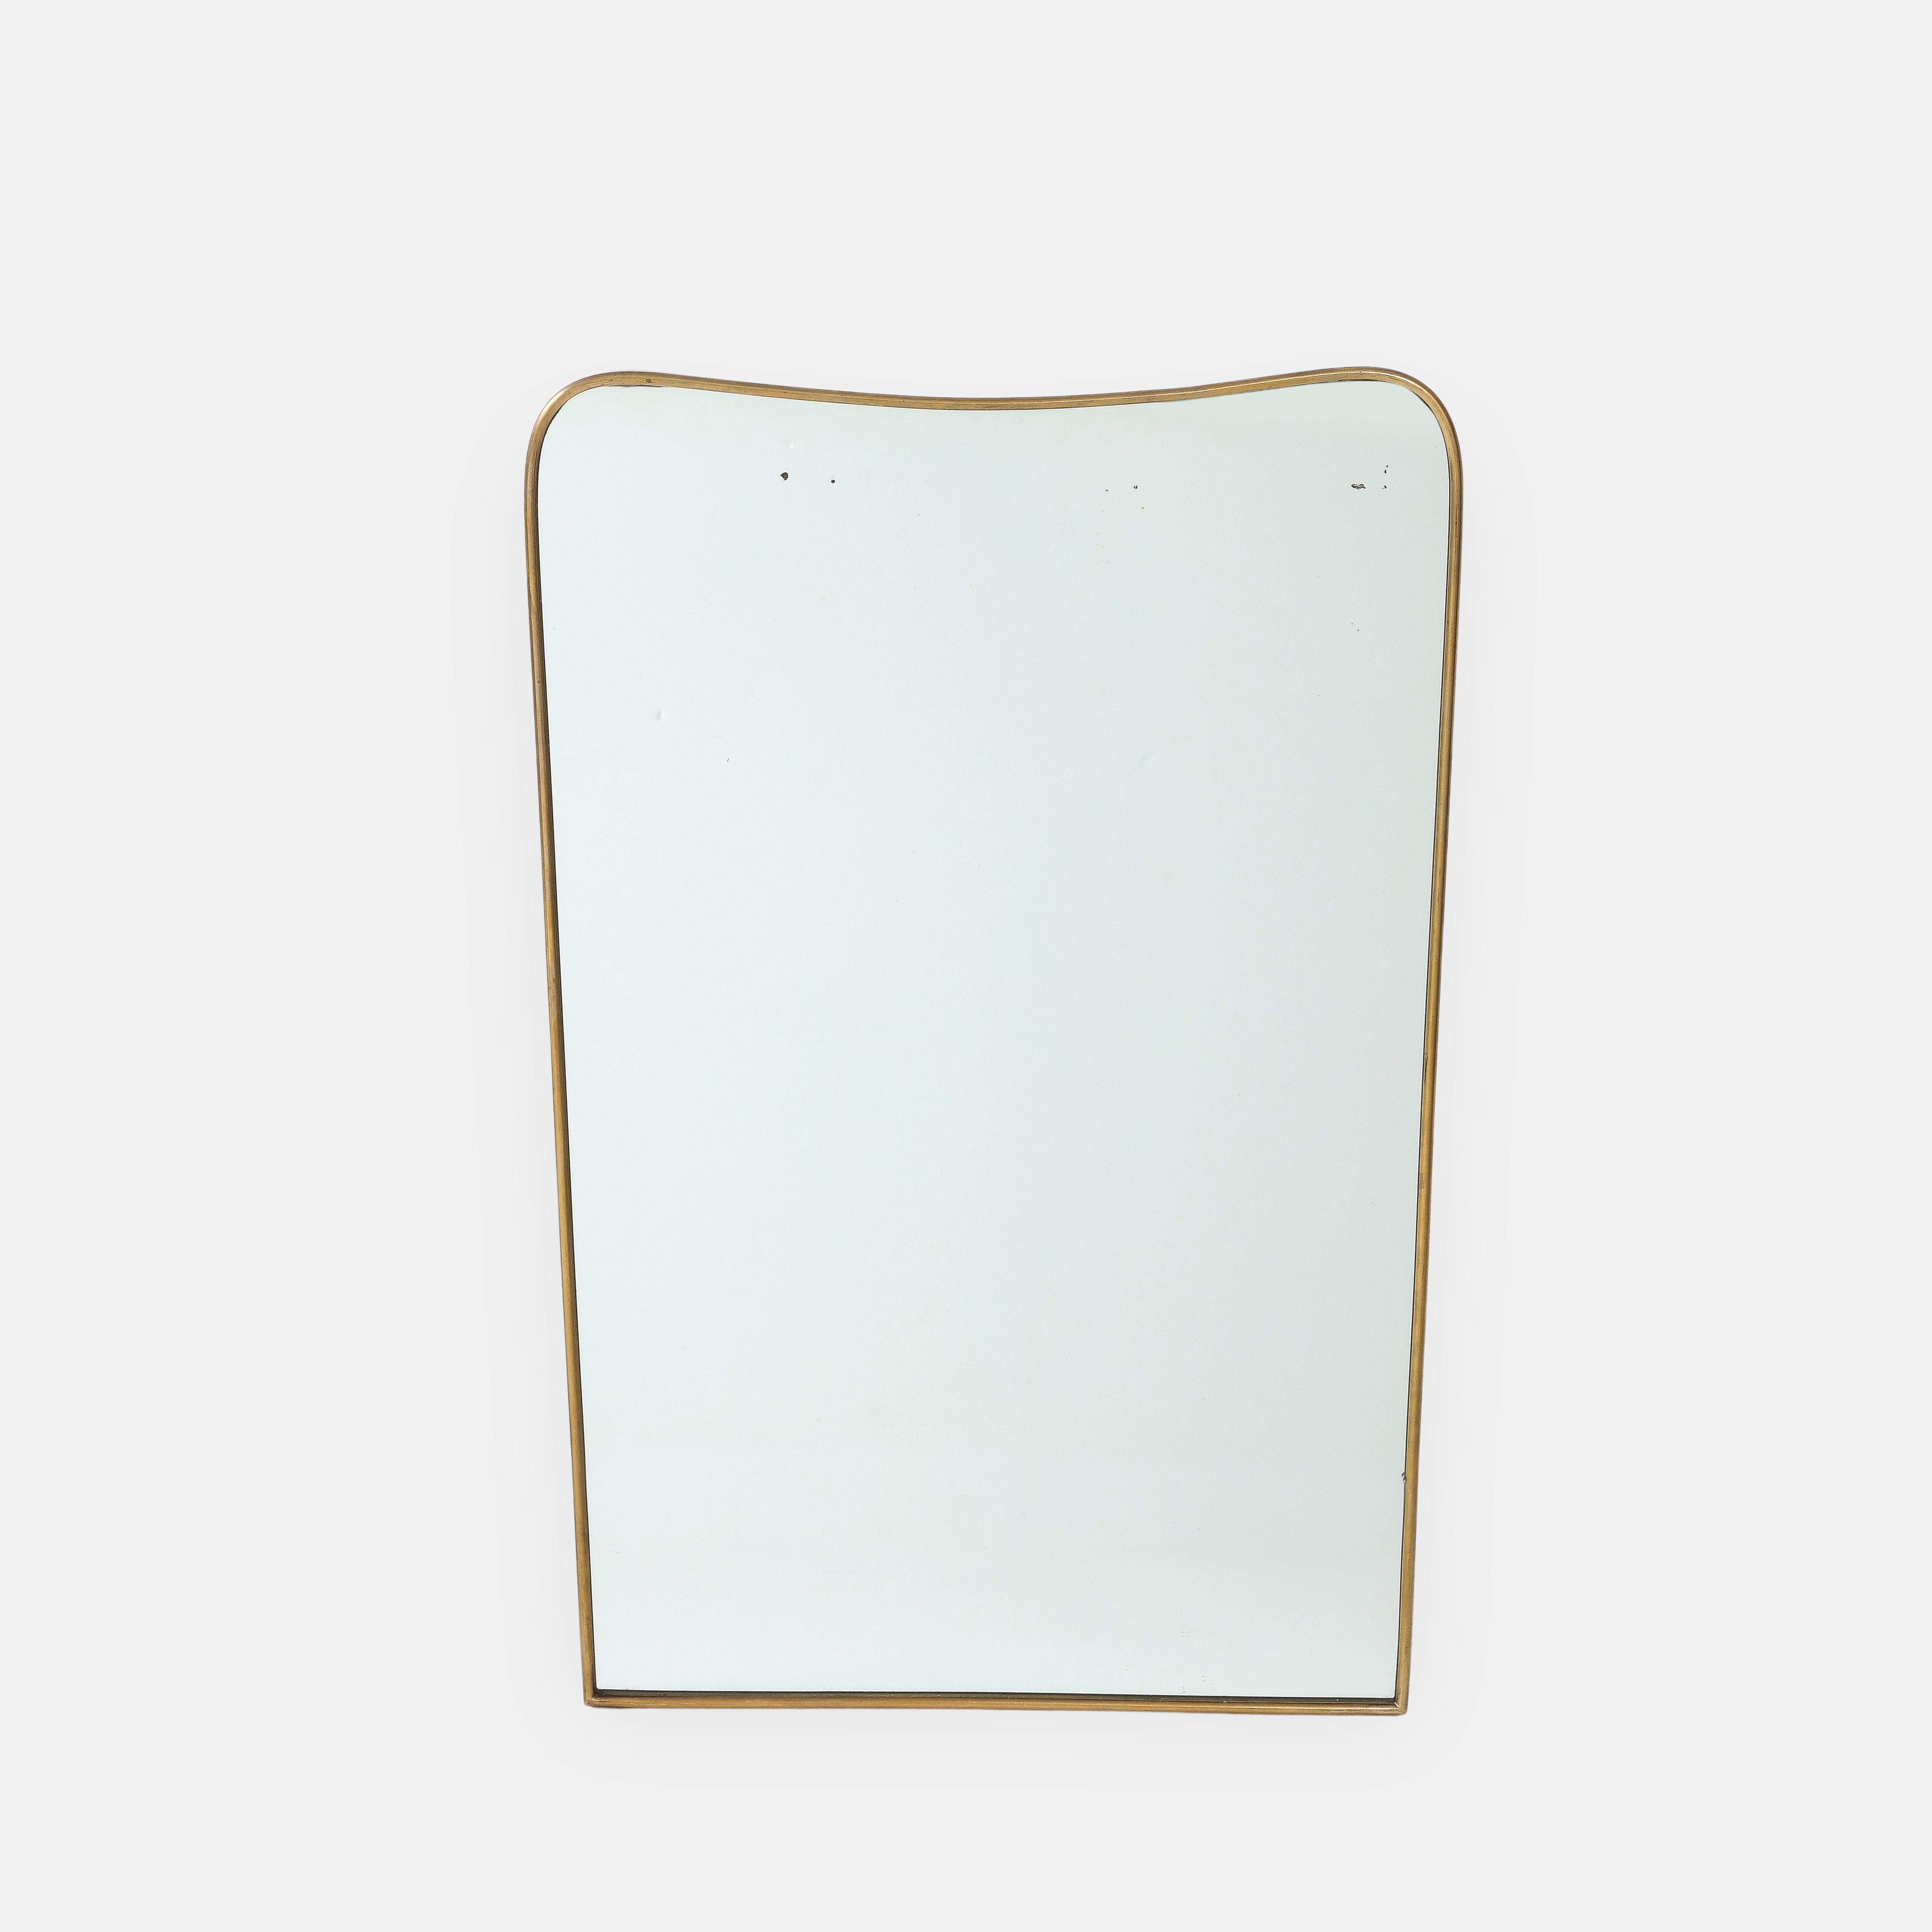 1950s Italian Modernist Pair of Shaped Brass Mirrors For Sale 3